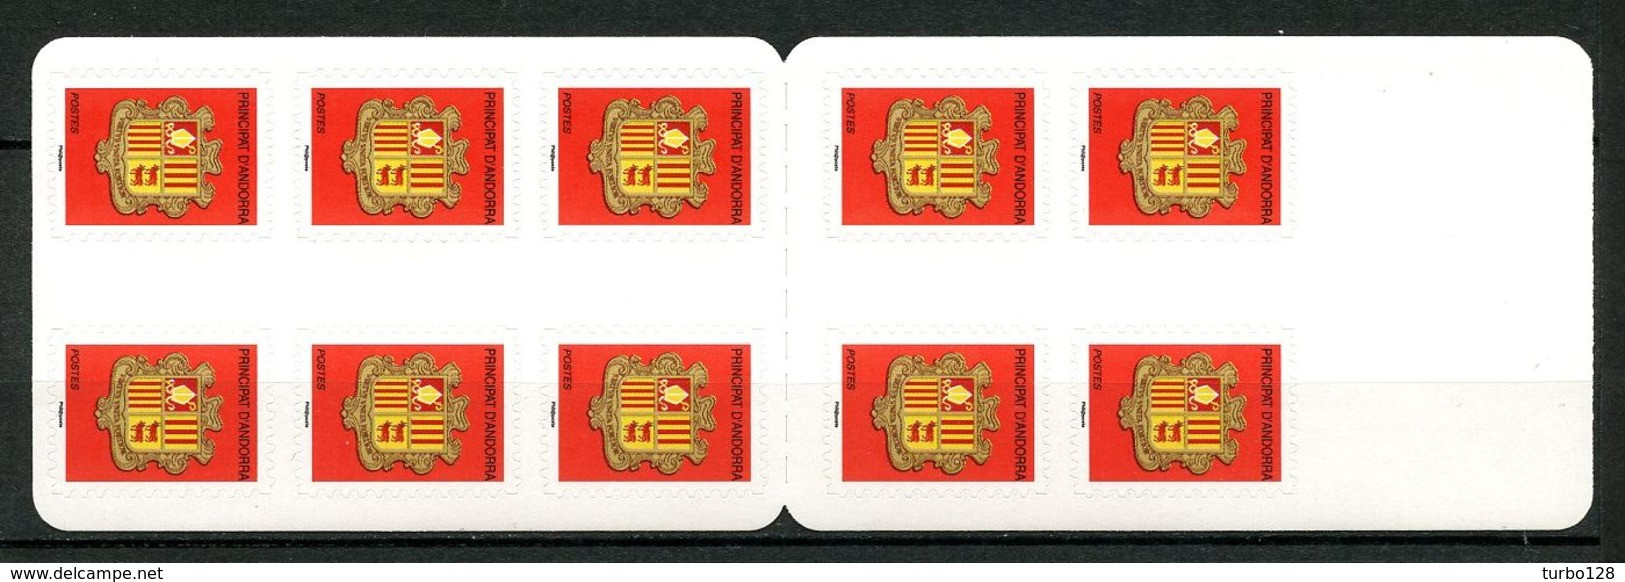 ANDORRE 2007 Carnet N° 13 ( 638 X 10 ) ** Neuf MNH Superbe C 20 € Armoiries Faune Vaches Animaux Coats Of Arms - Libretti